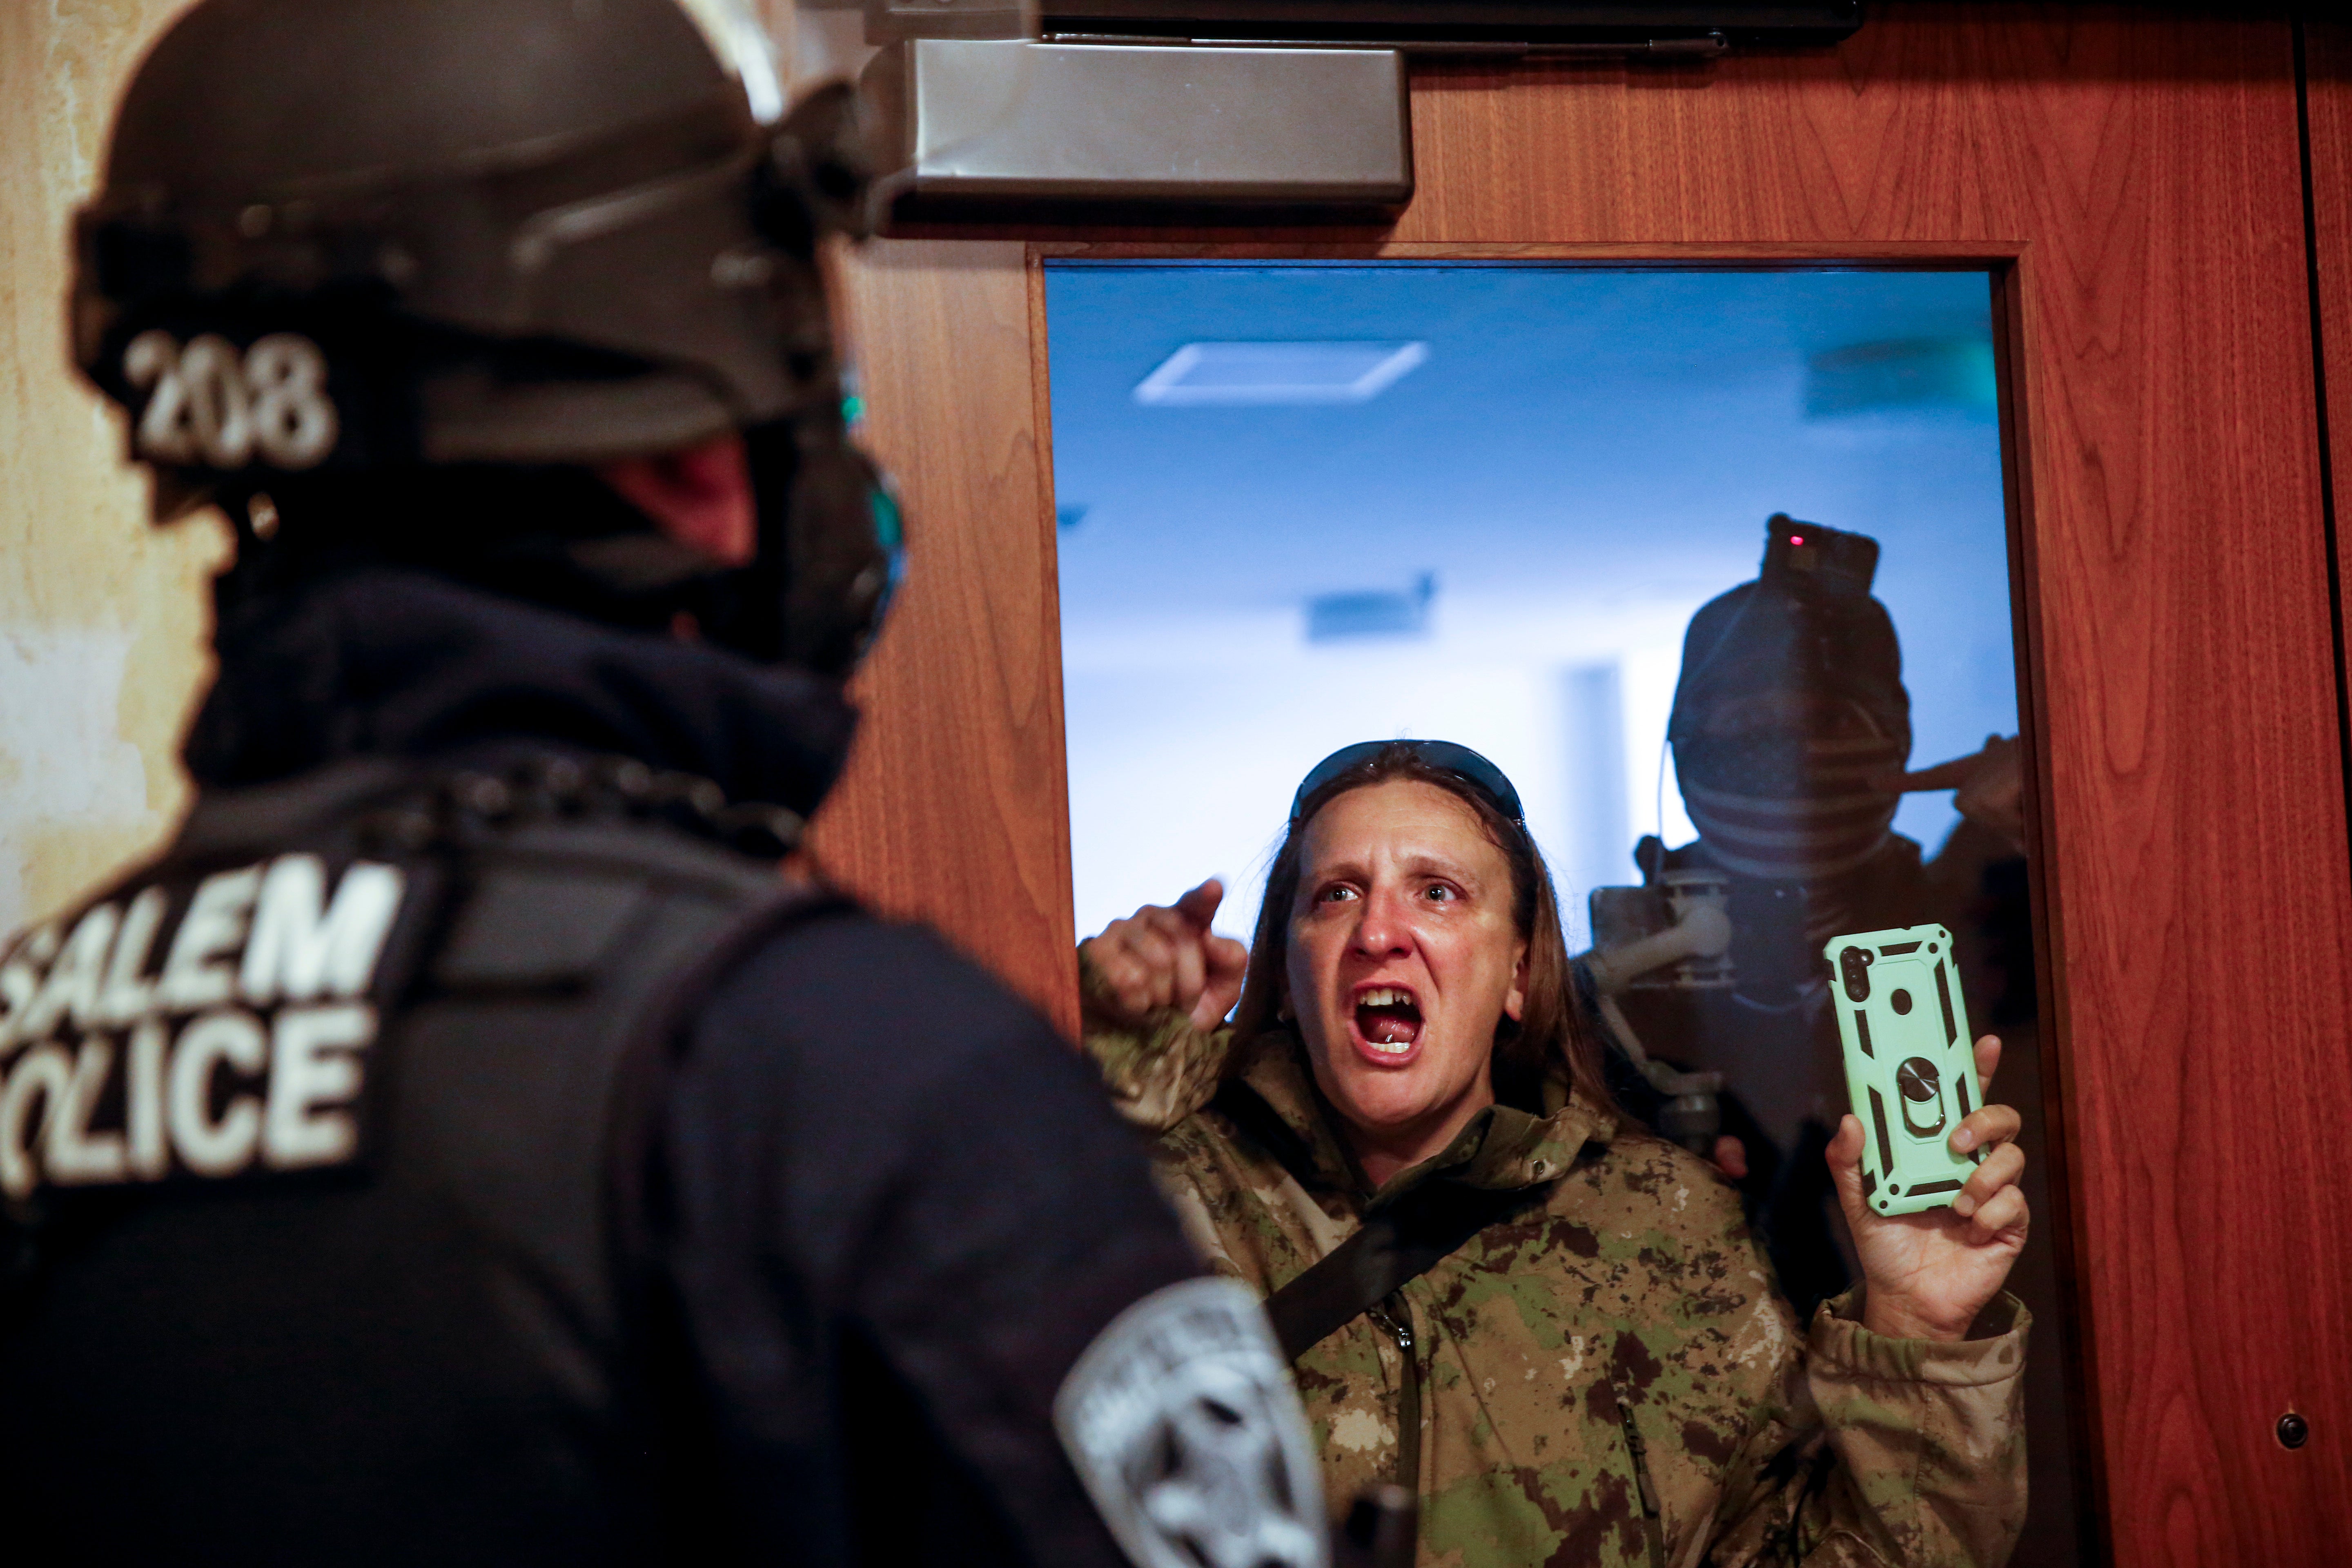 A protester screams at Salem police during the demonstration